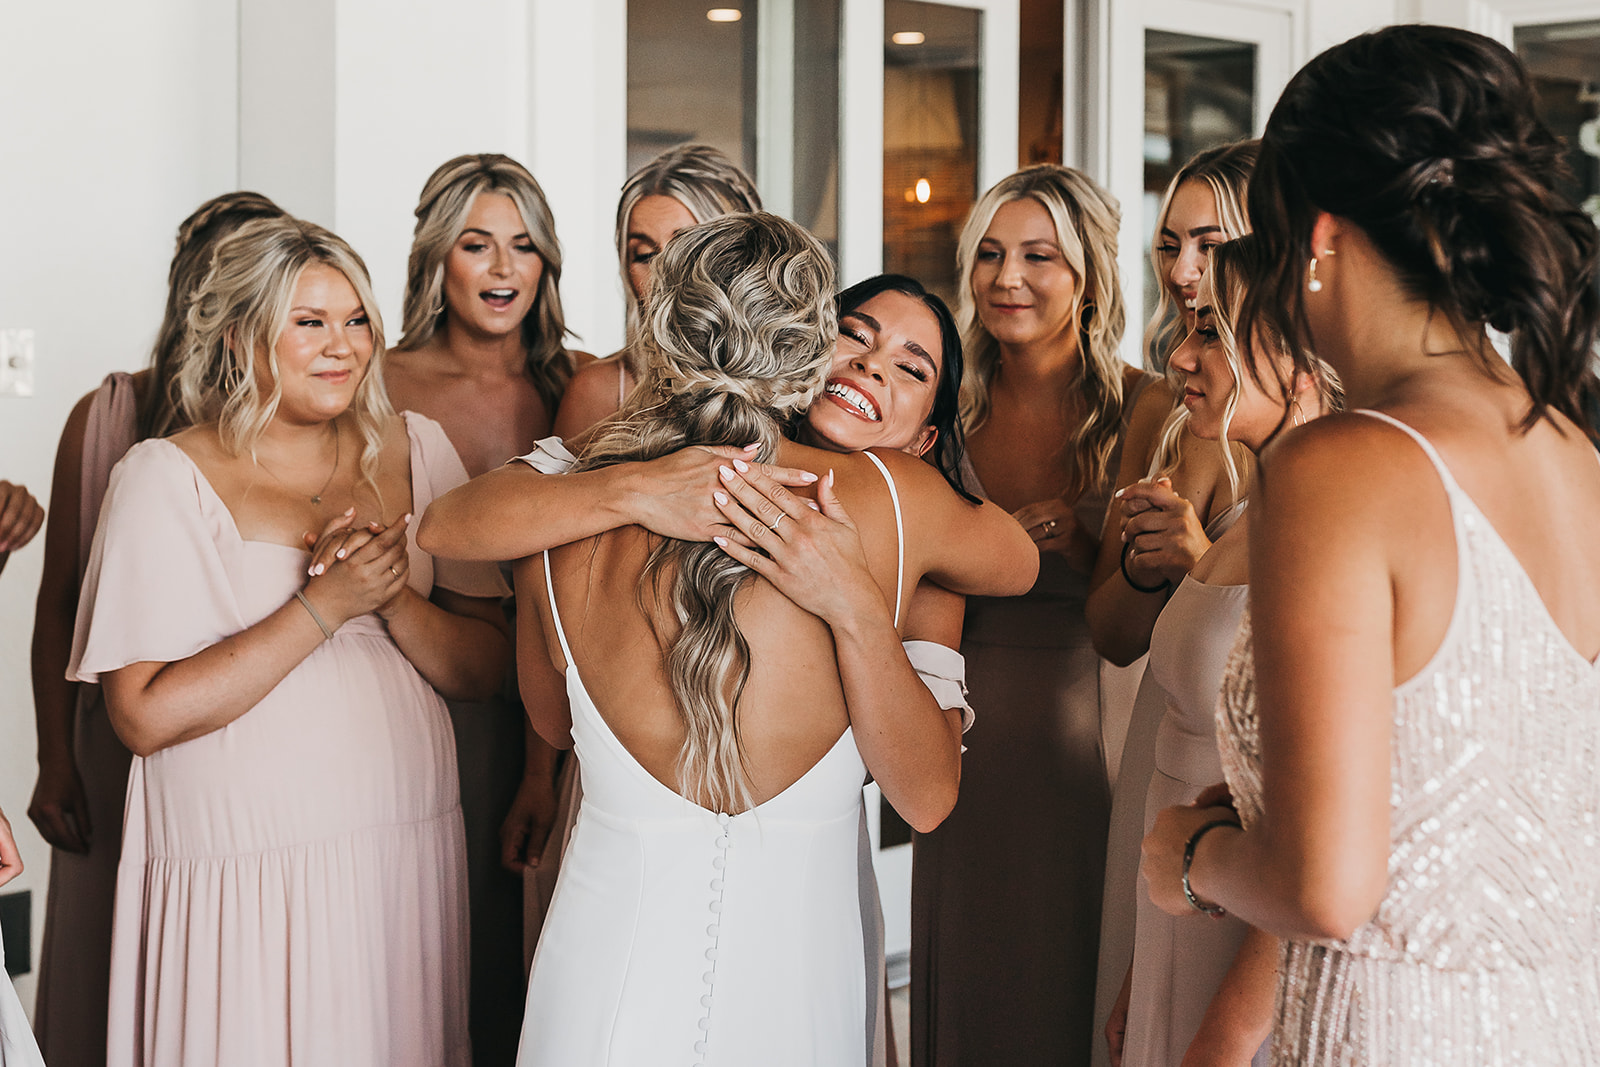 Bridesmaids sharing a special moment seeing the bride in her dress for the first time